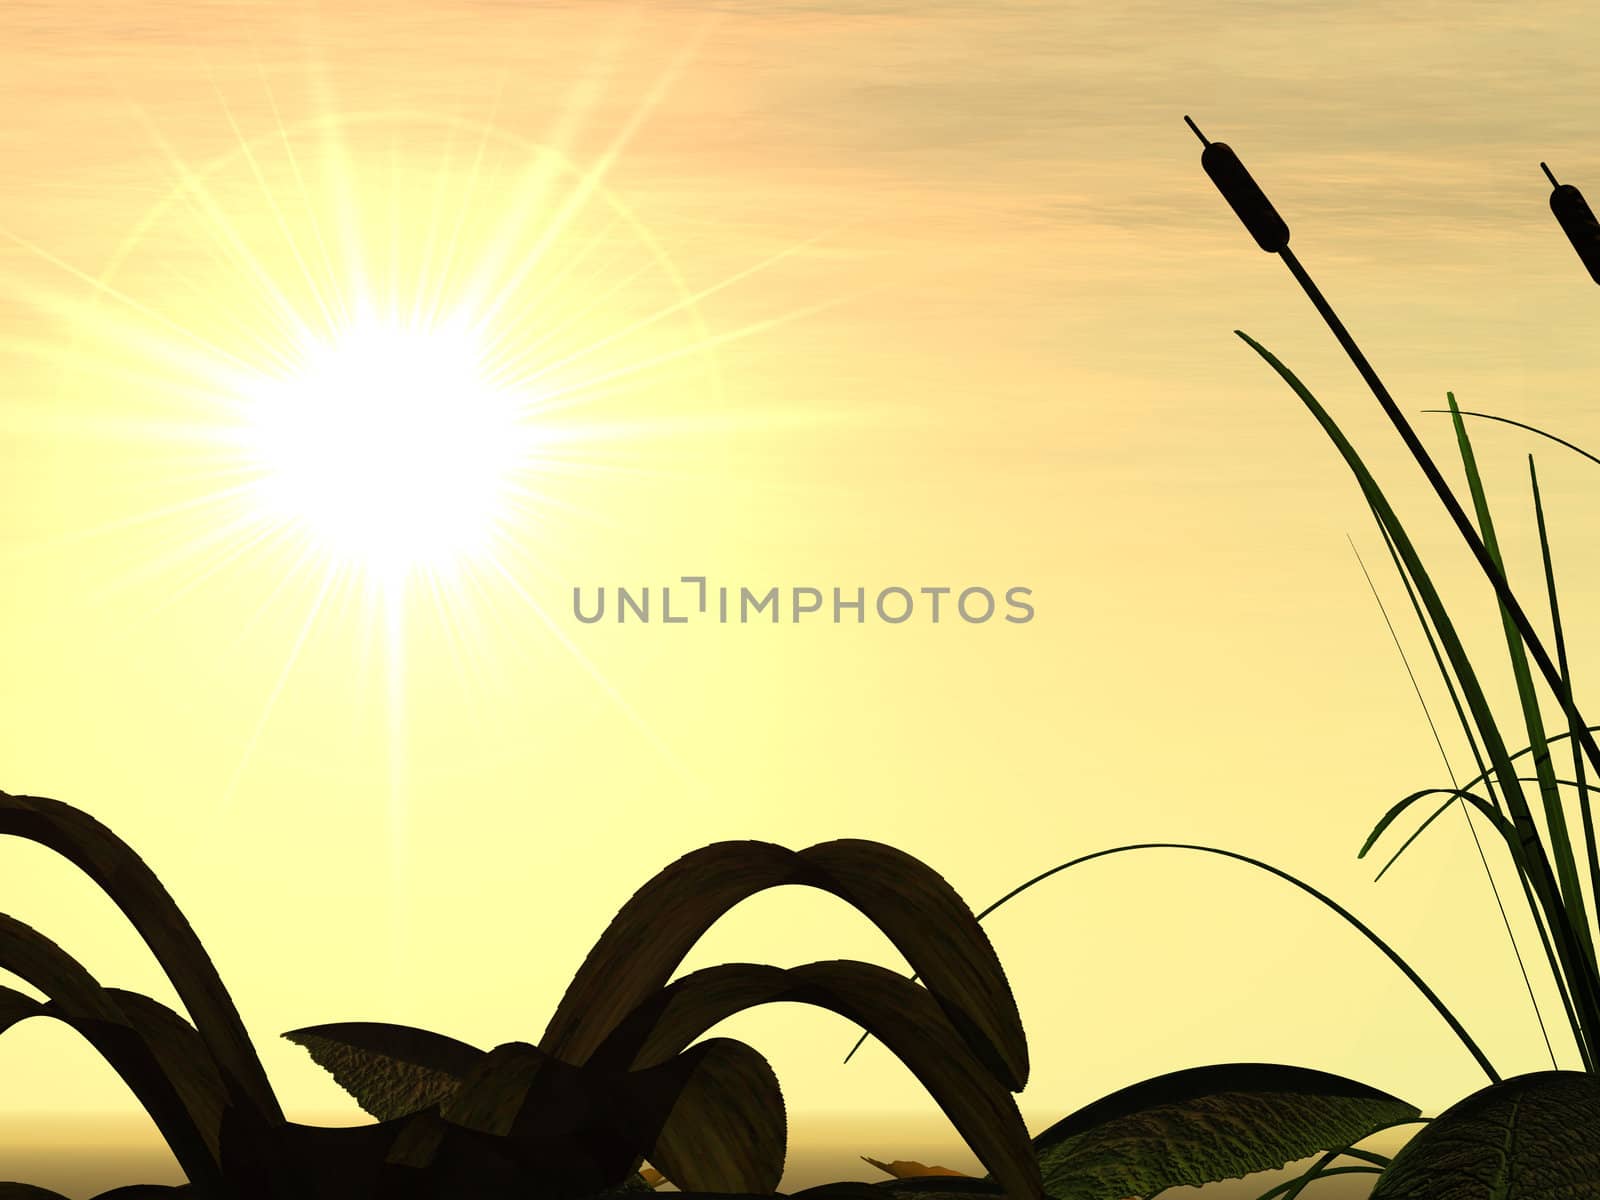 Sunset. In the foreground a marsh grass and a cane